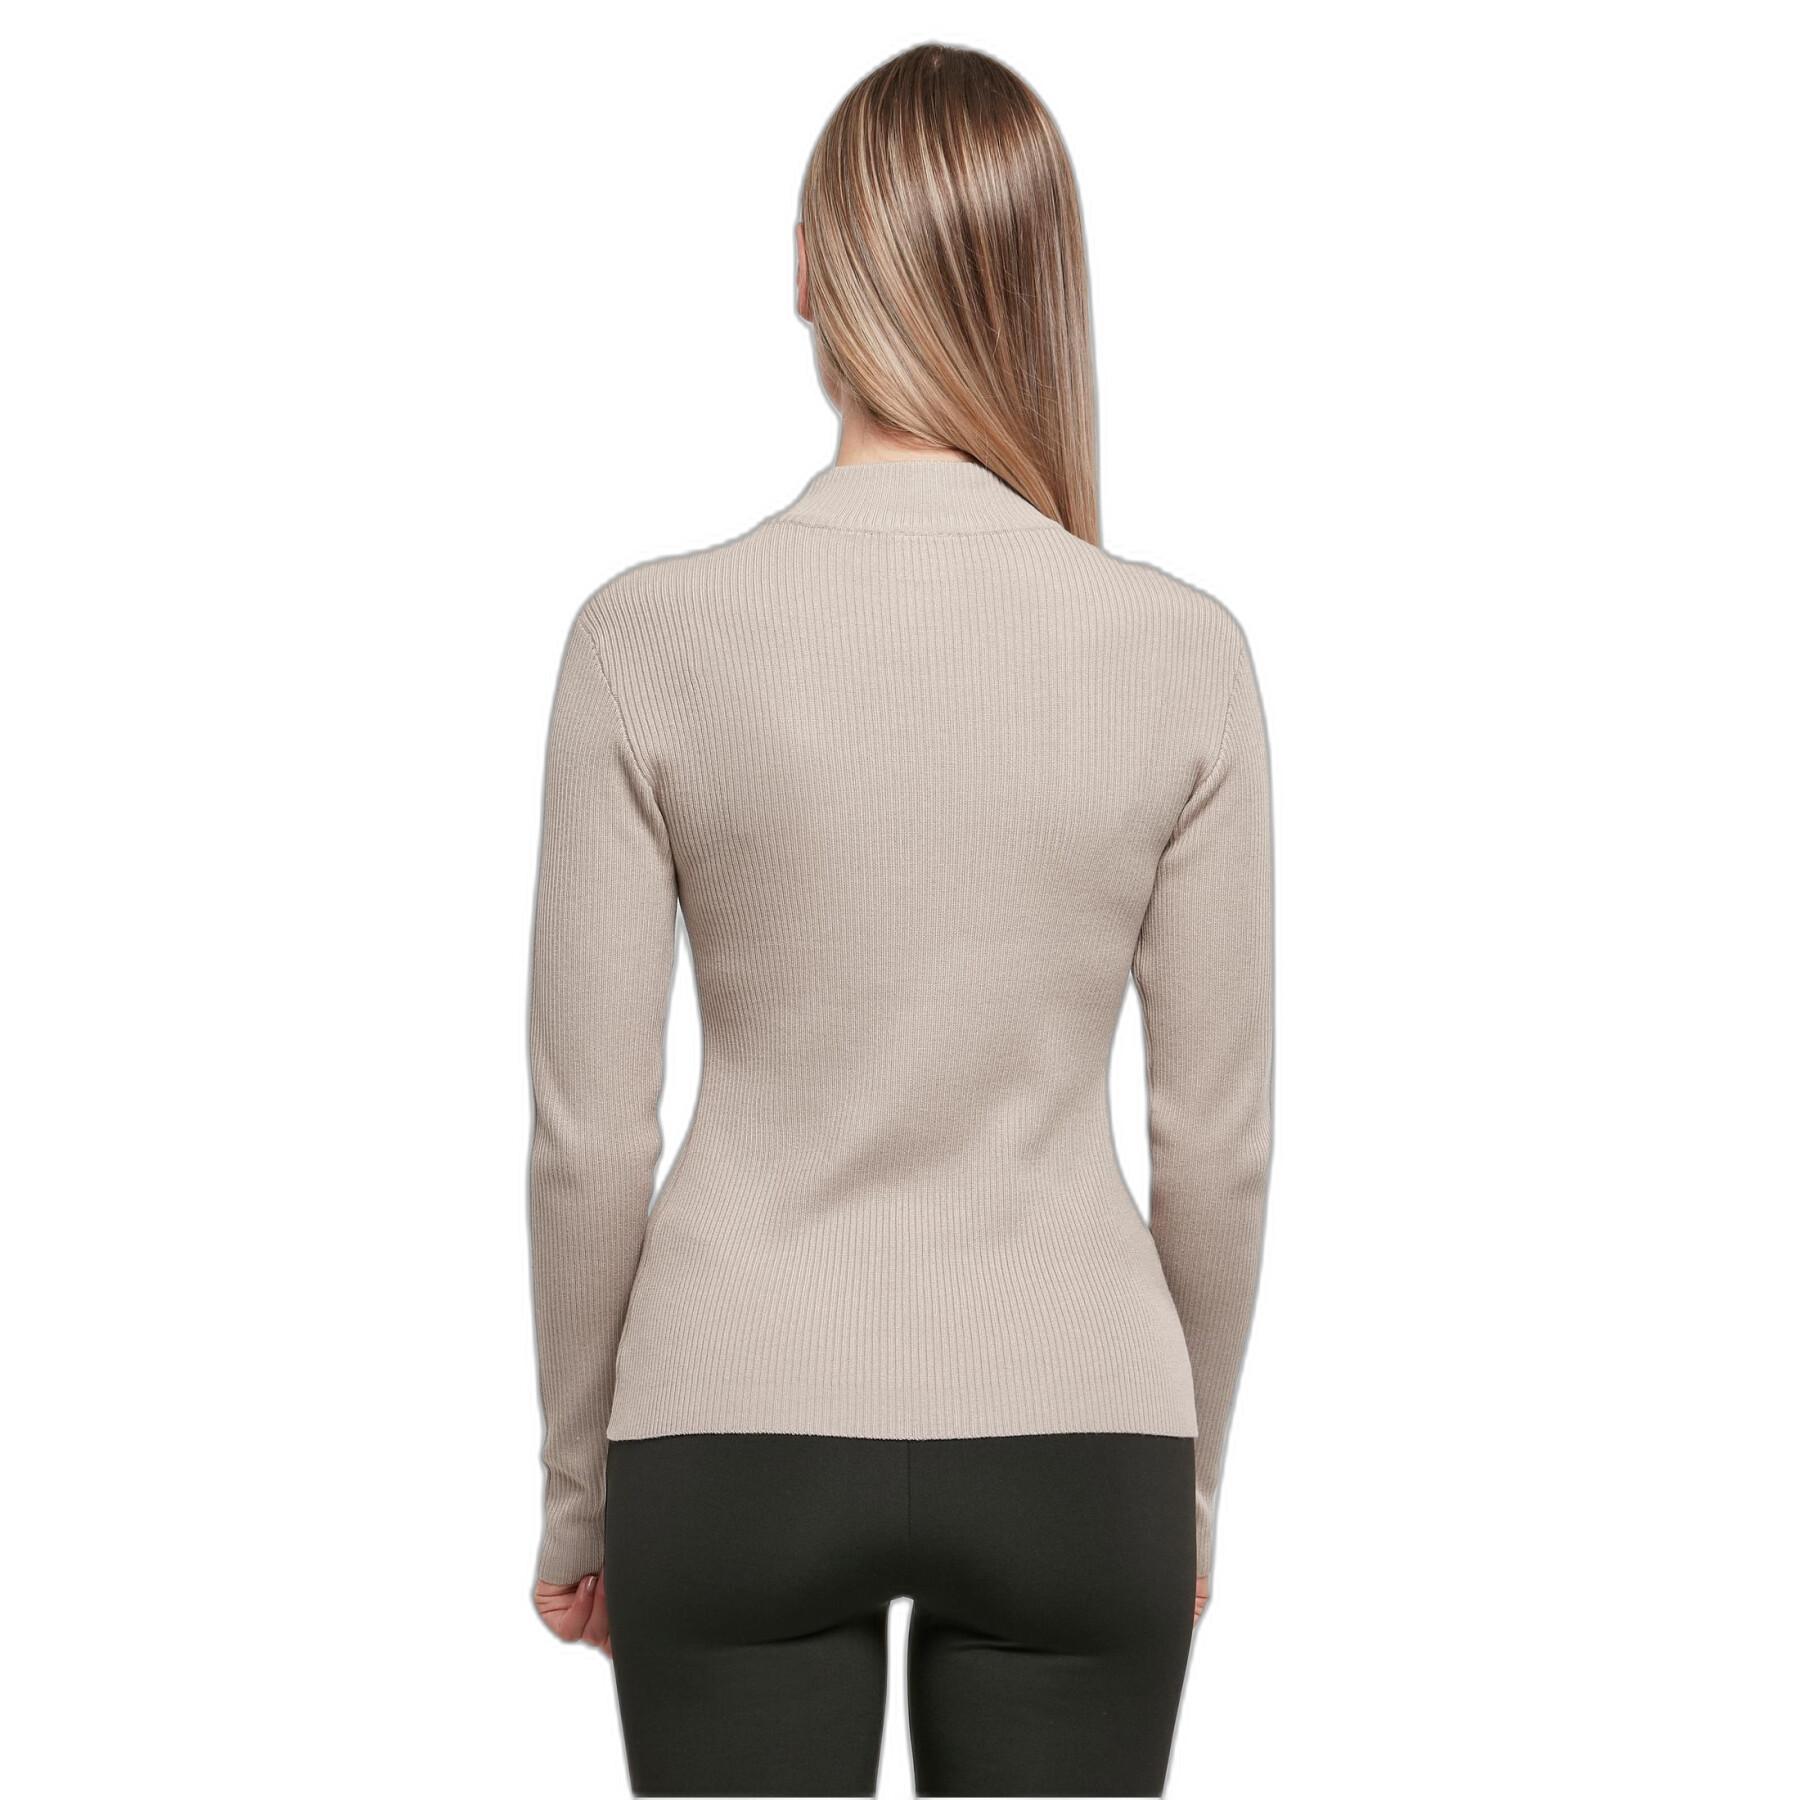 Ribbed knit turtleneck sweater for women Urban Classics GT